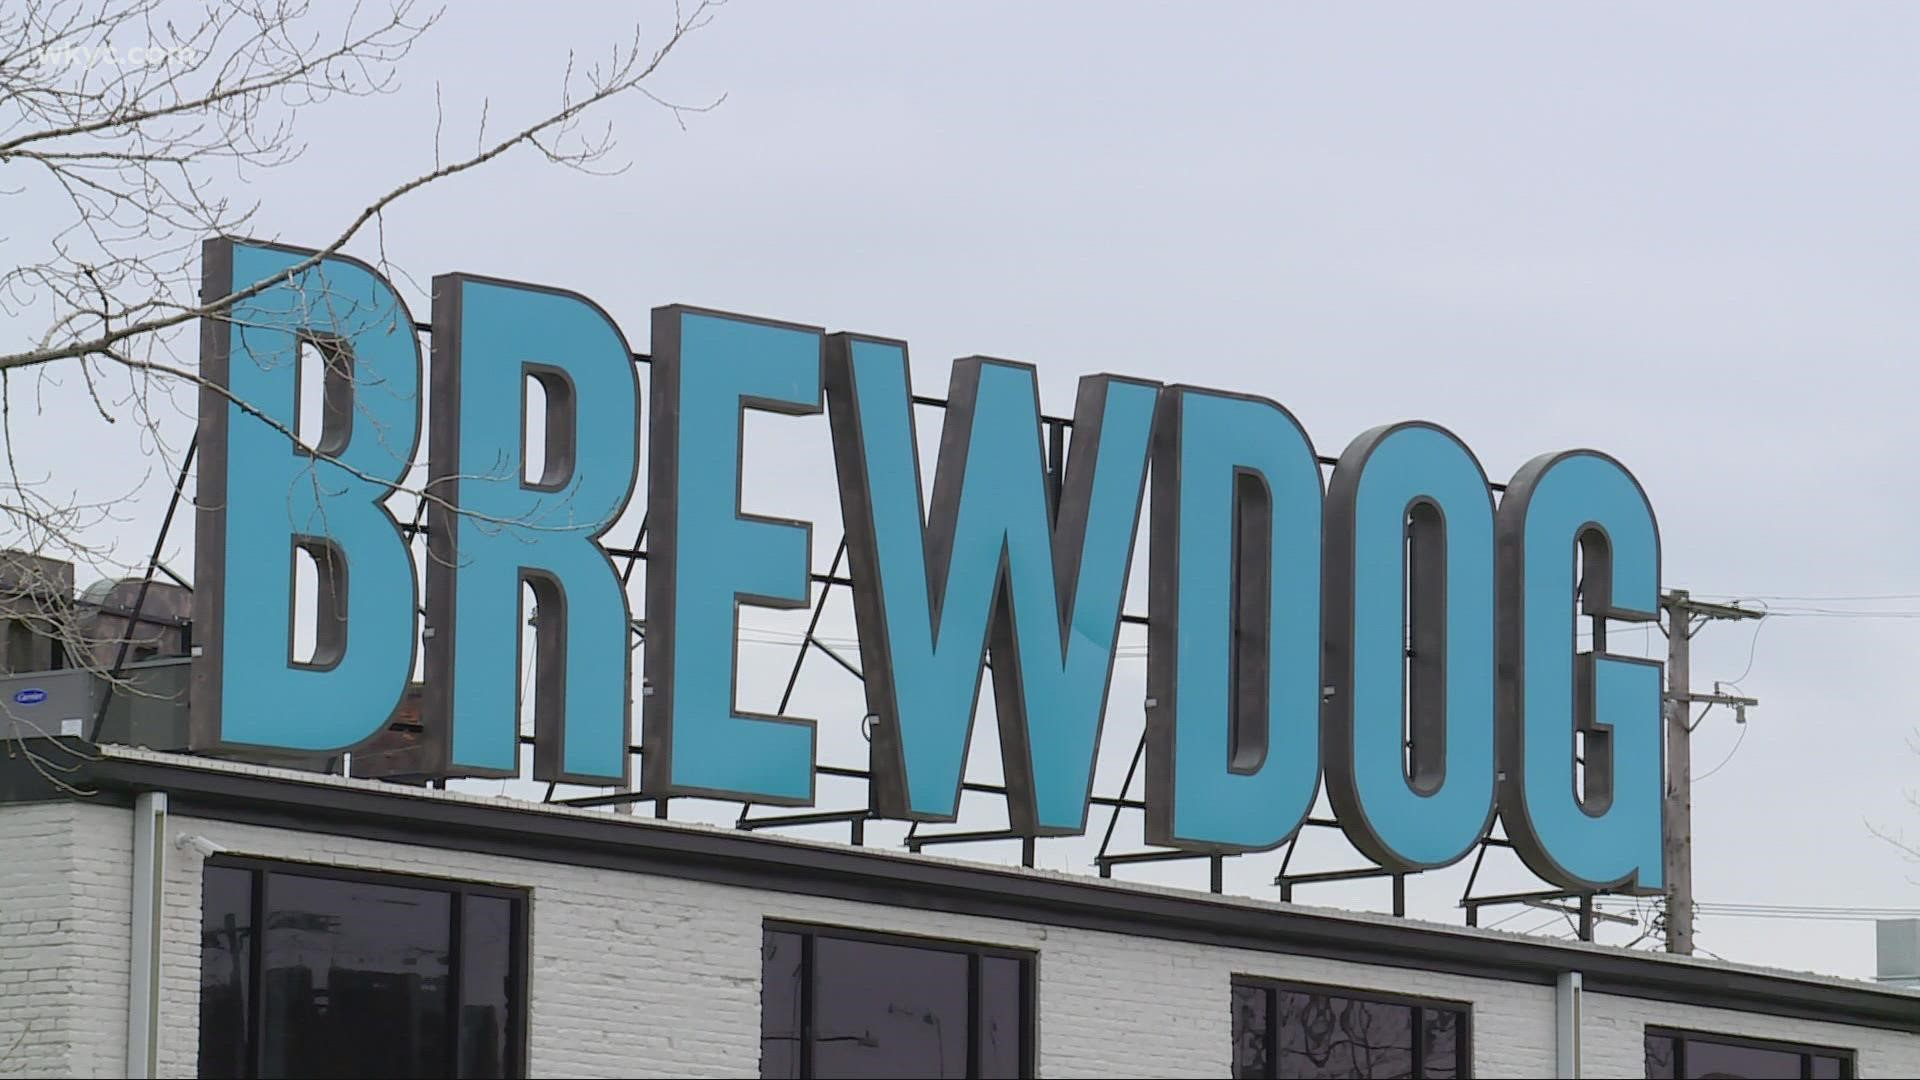 The international brewer says it wants to make Cleveland home to be apart of the revitalization in the area.